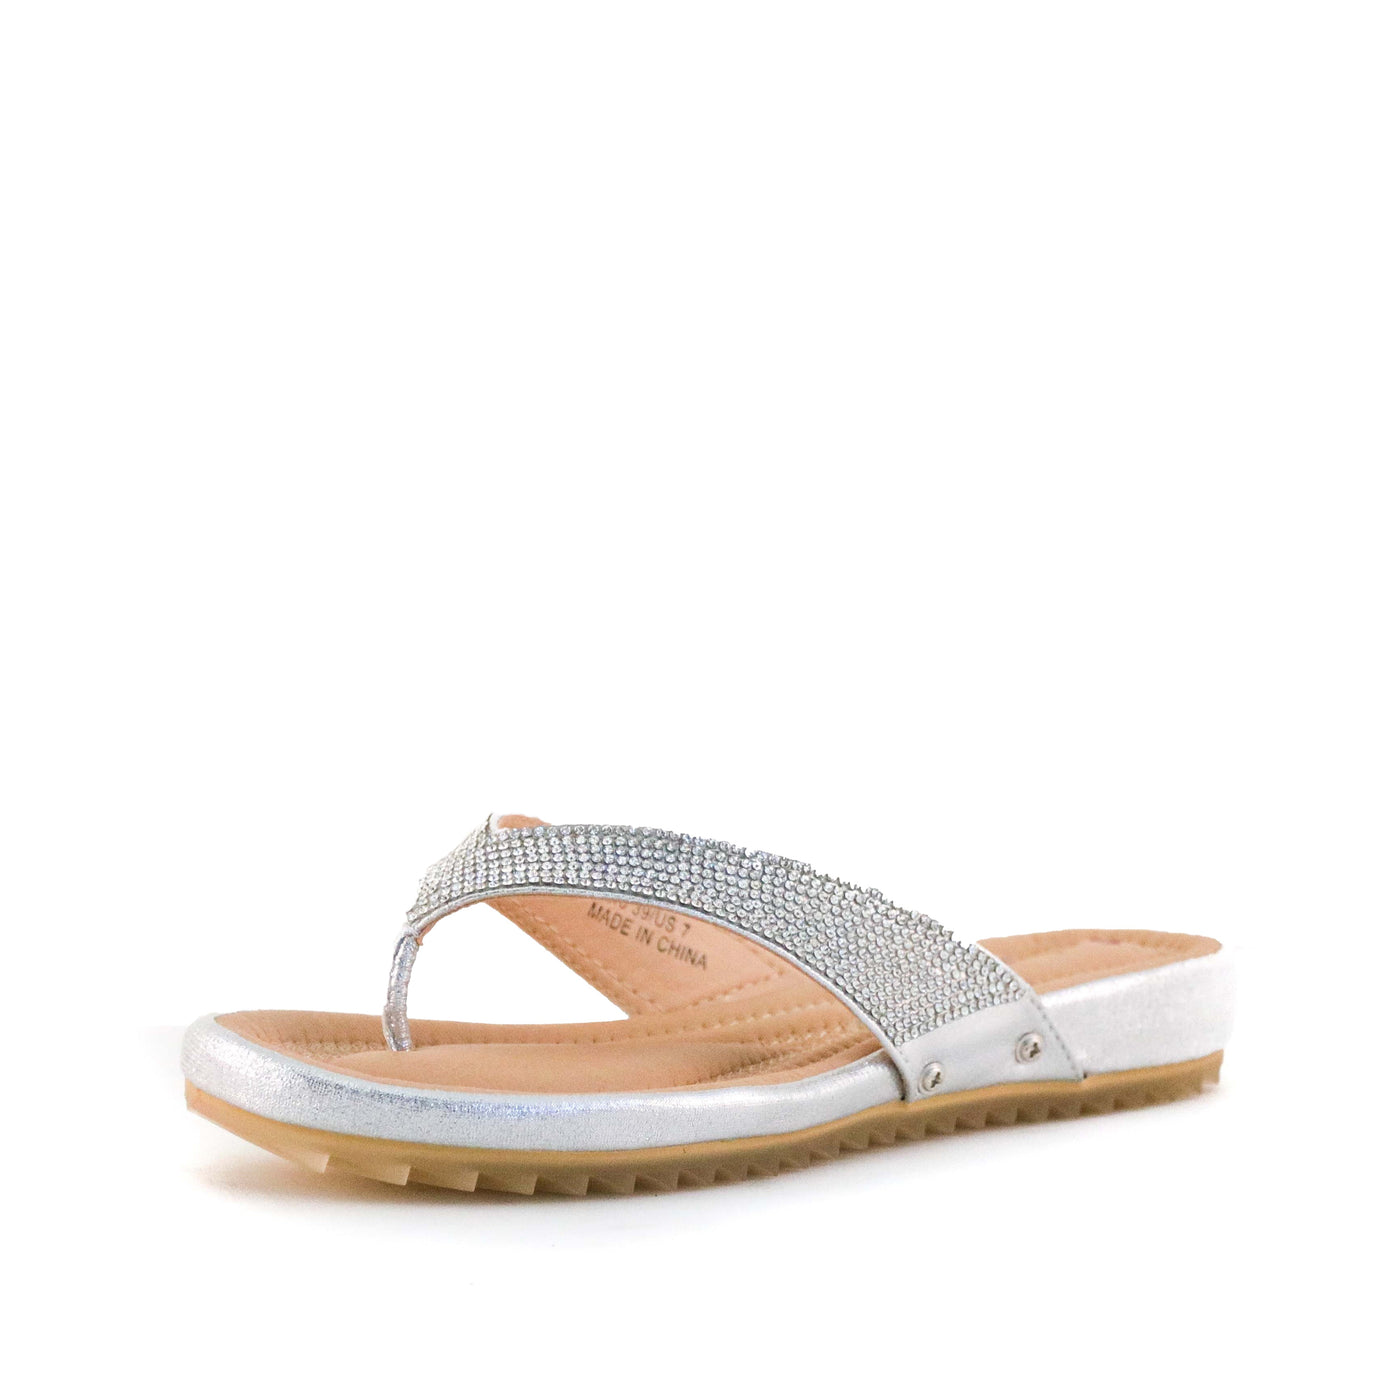 Women's Shellie Crystal Thong Sandal by Nest Shoes